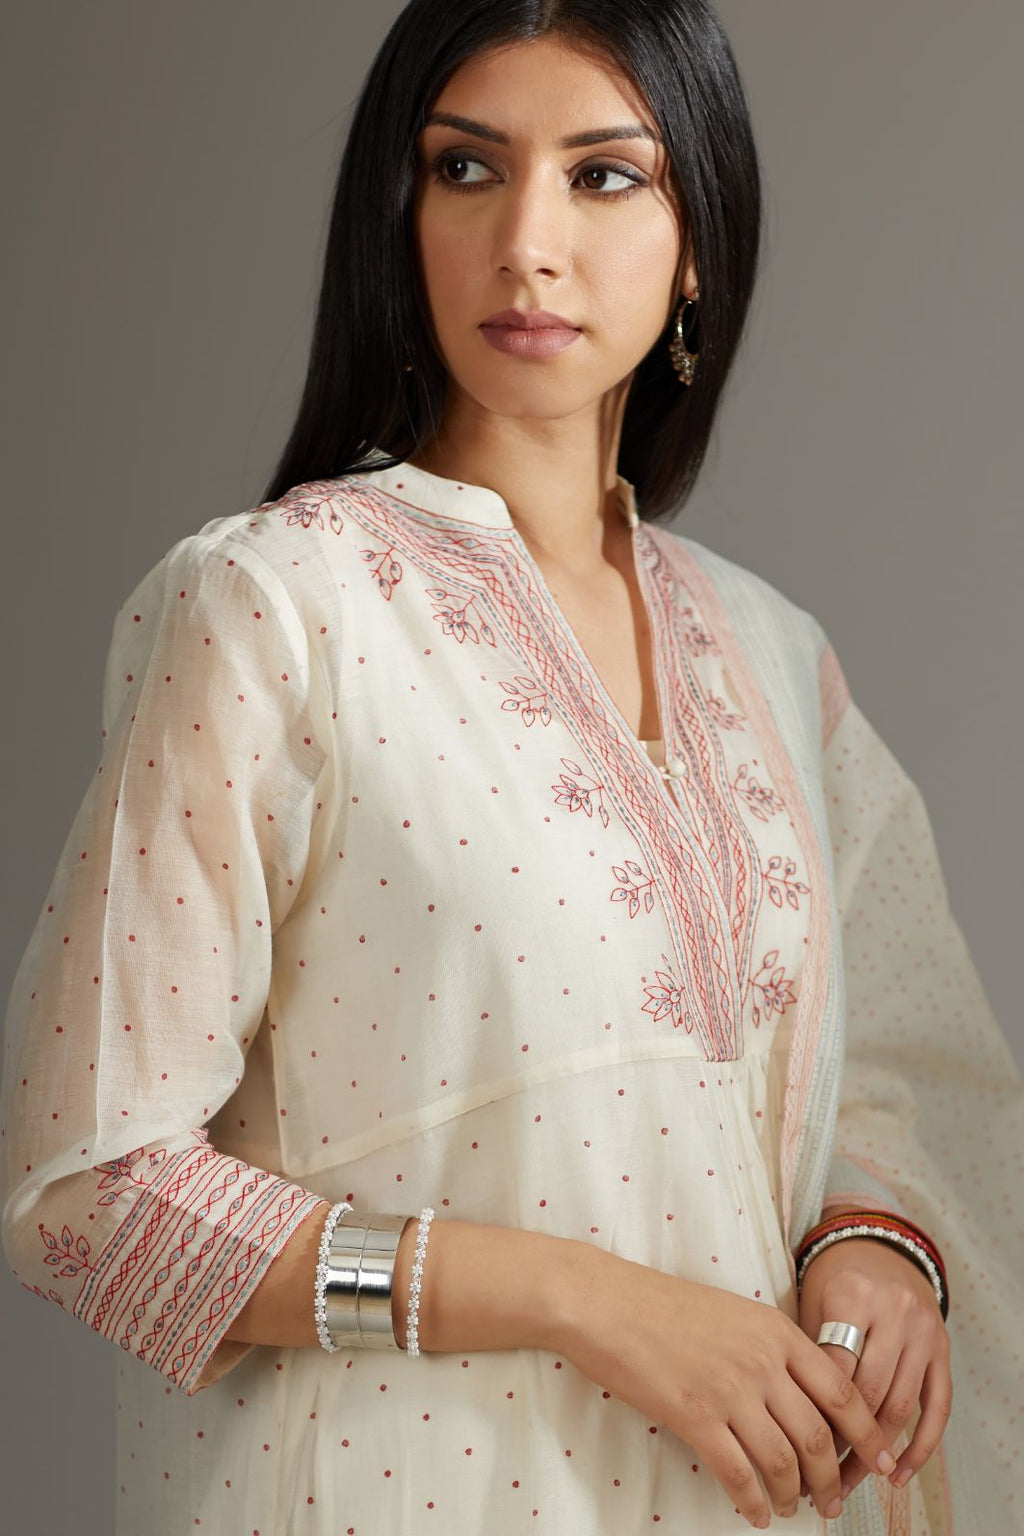 Hand block printed kurta set detailed with quilted embroidery.